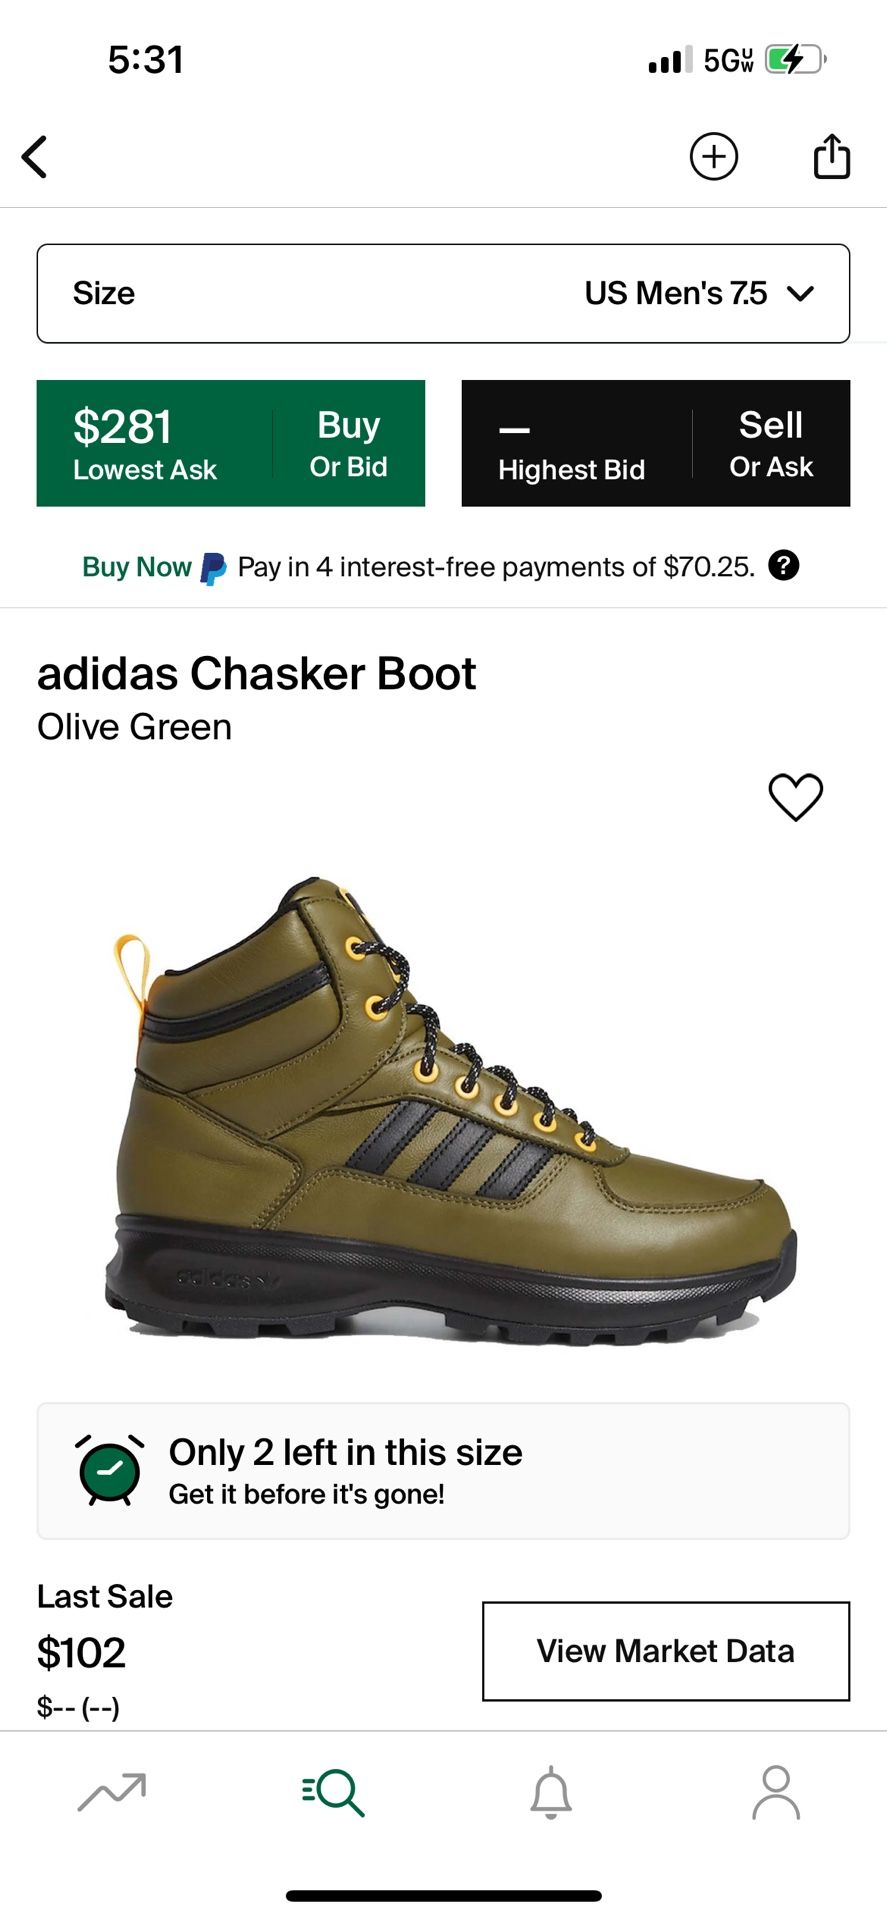 Adidas Chasker Boot 